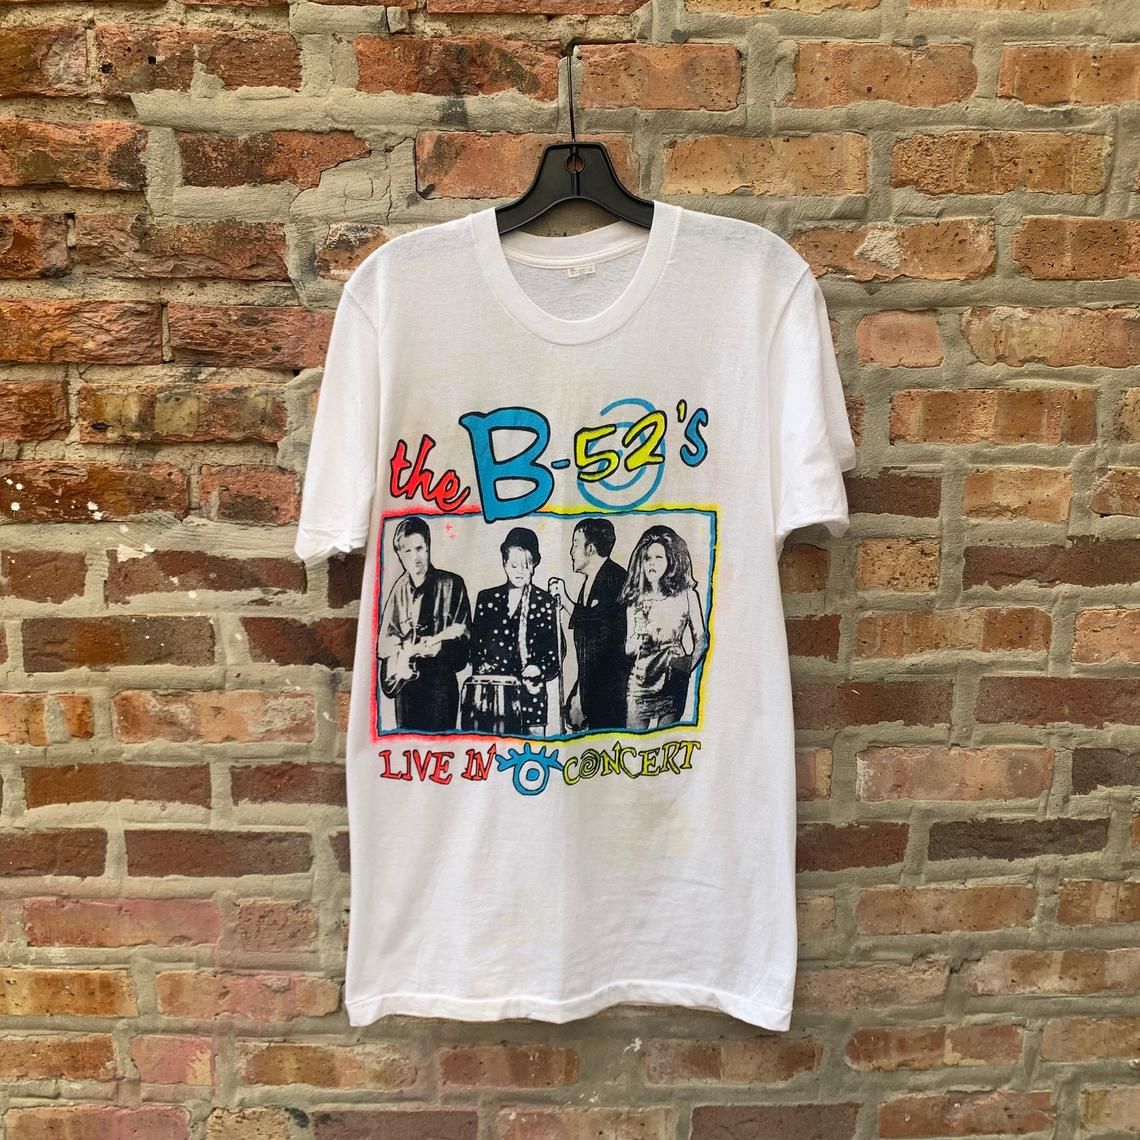 Vintage 80s The Cosmic Thing Tour New Wave Post Punk Band Tee B52s Shirt